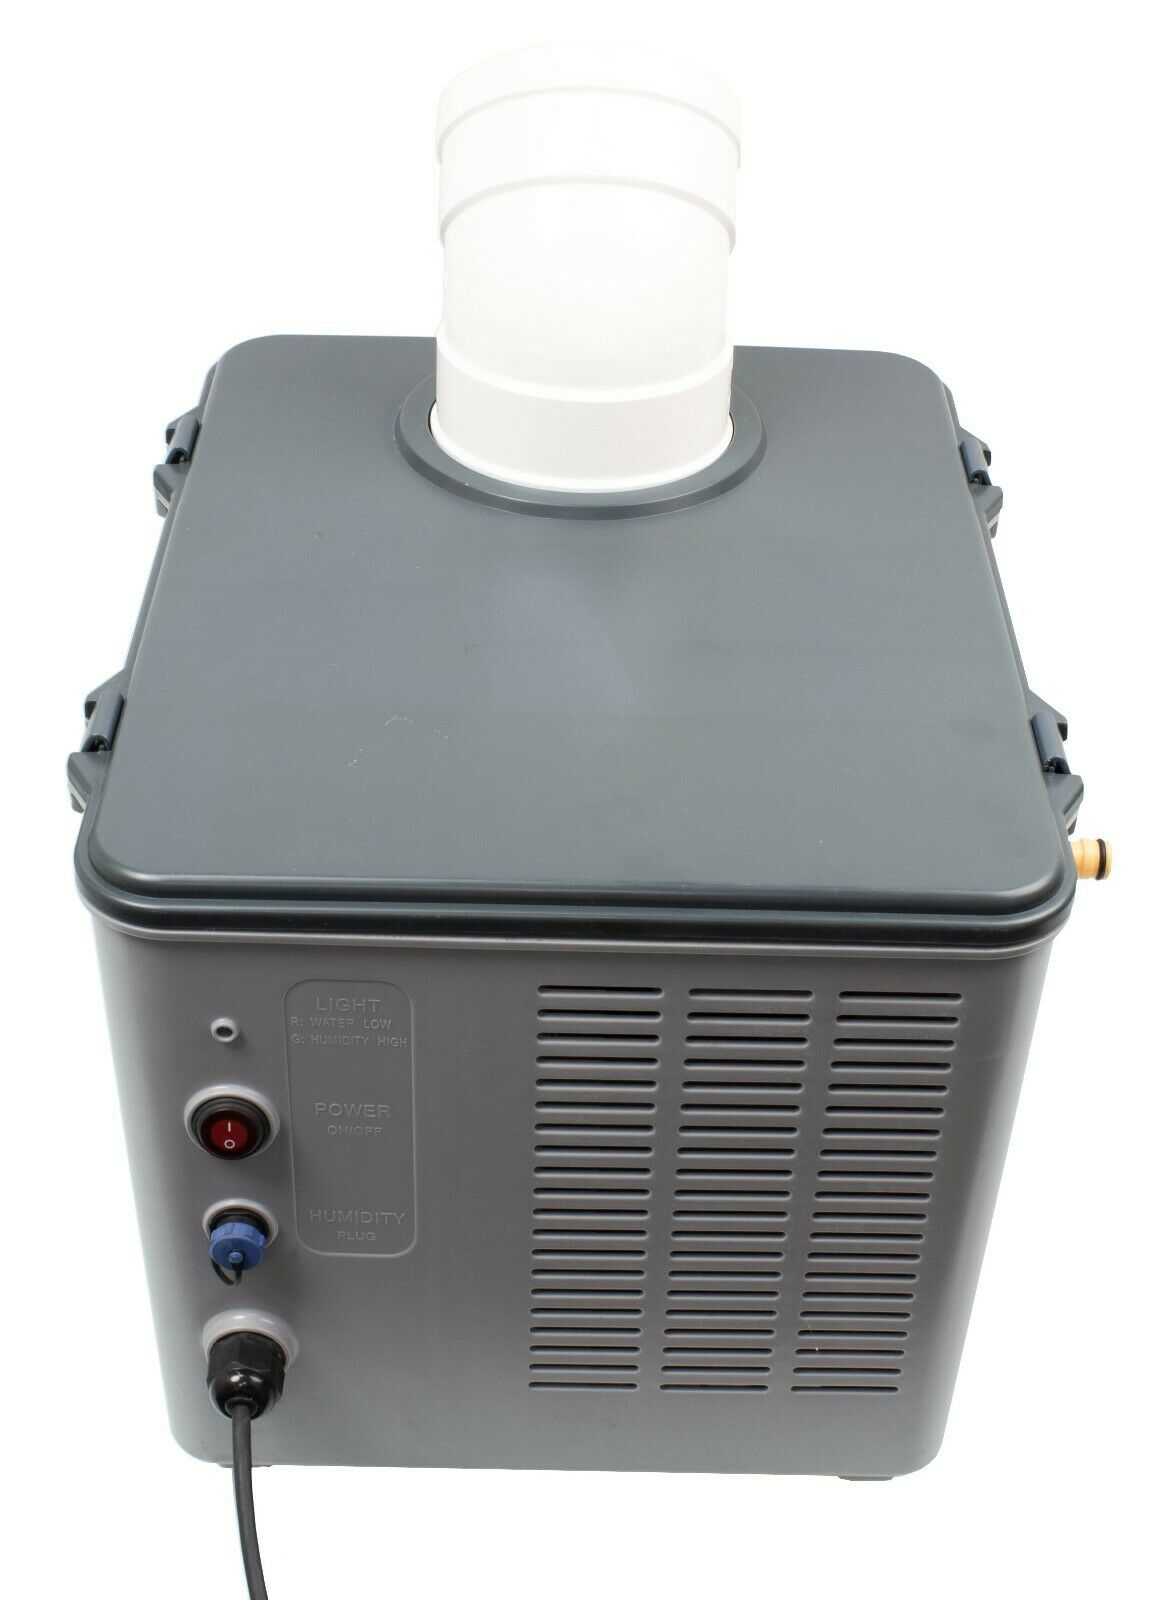 SonicAir G.A.S Pro Humidifiers Humidity Control